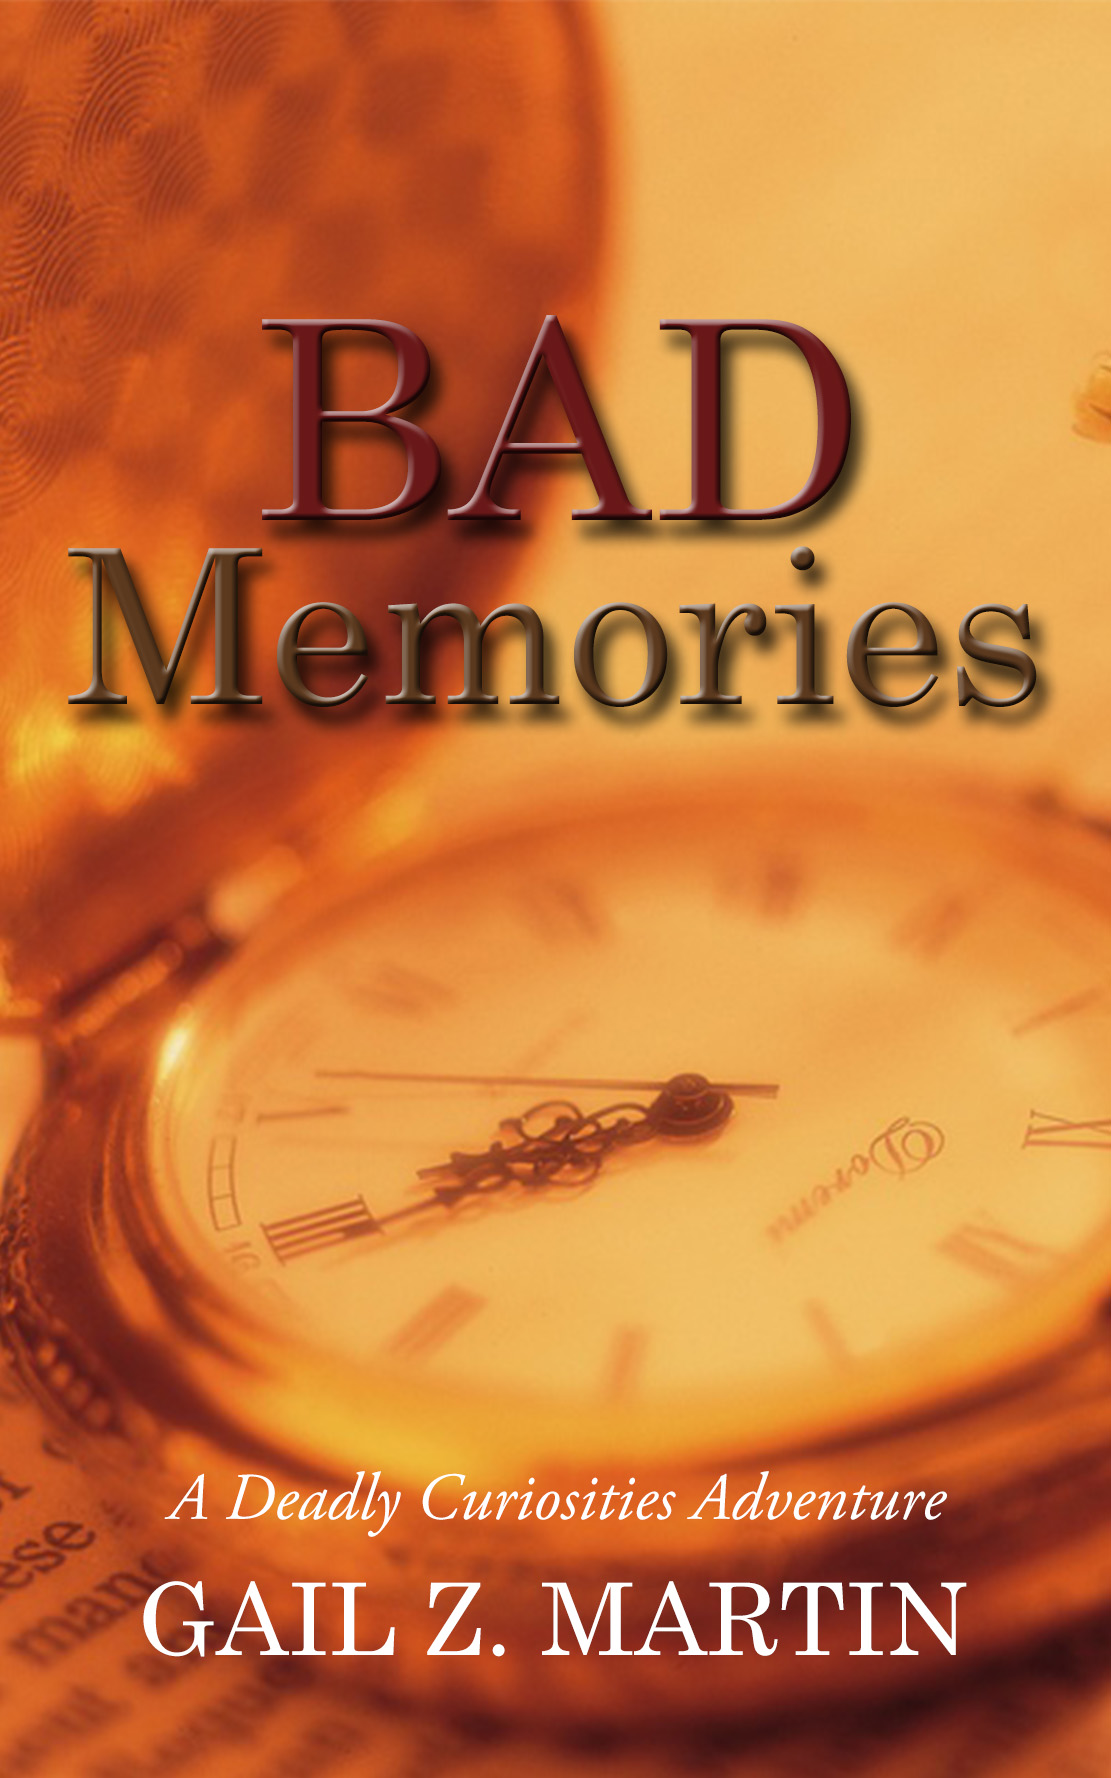 people with bad memories